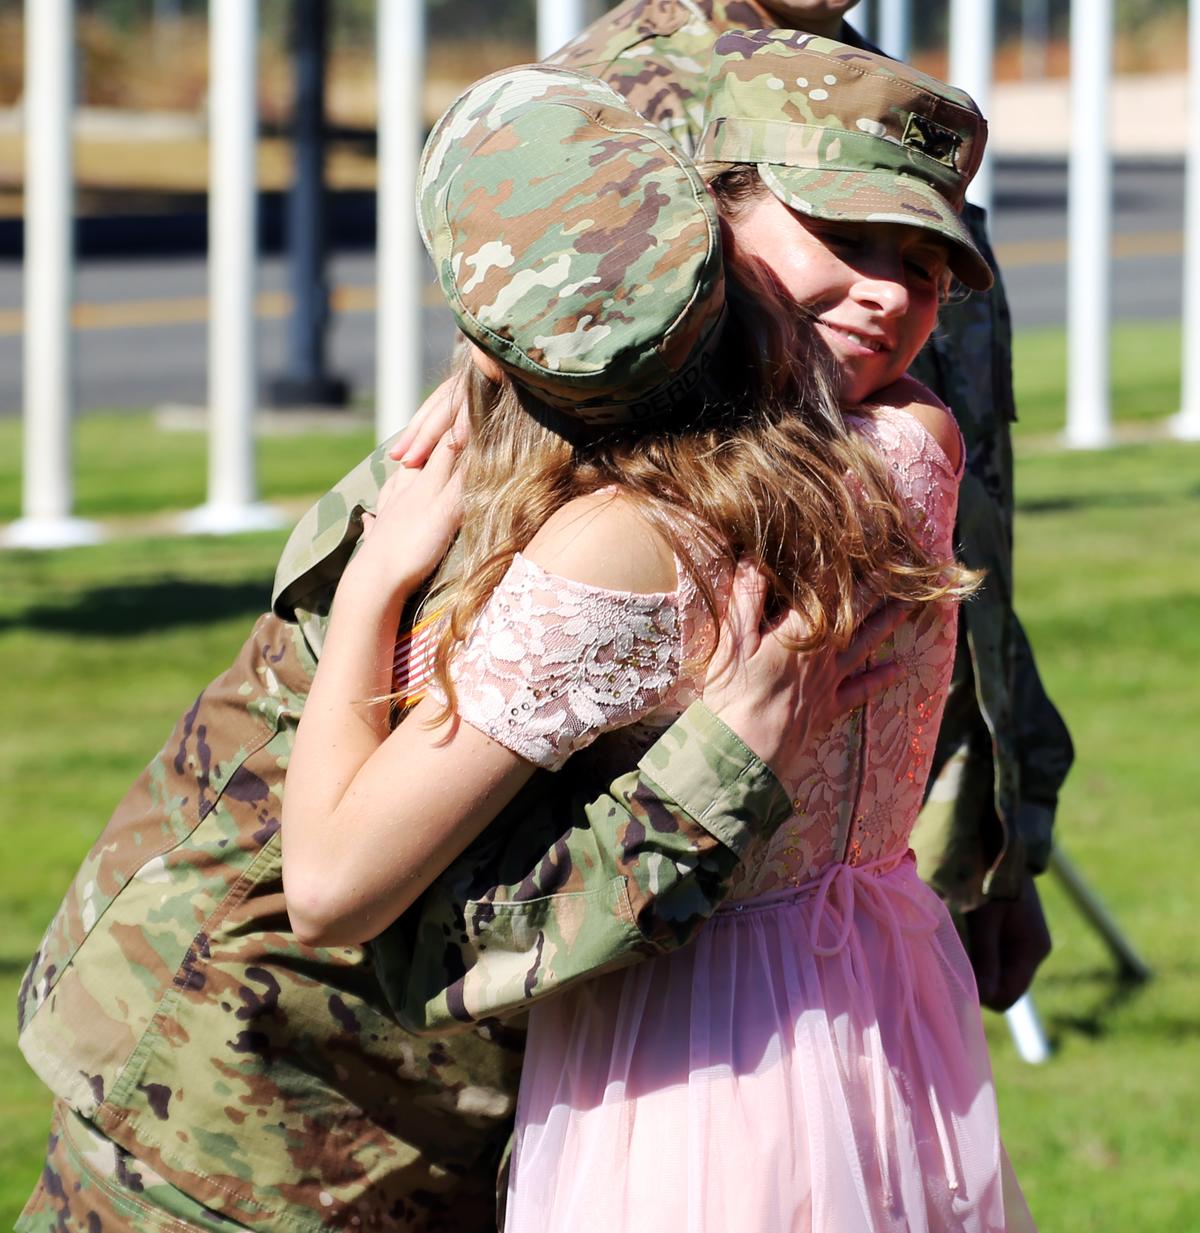 Col. Kristin Derda hugs her daughter, Emilia, after being promoted at Camp Murray, Washington, on Sept. 3, 2020 (<a href="https://www.dvidshub.net/image/6338849/joint-promotion-ceremony-special-washington-guard-family">Joseph Siemandel</a>/U.S. National Guard)